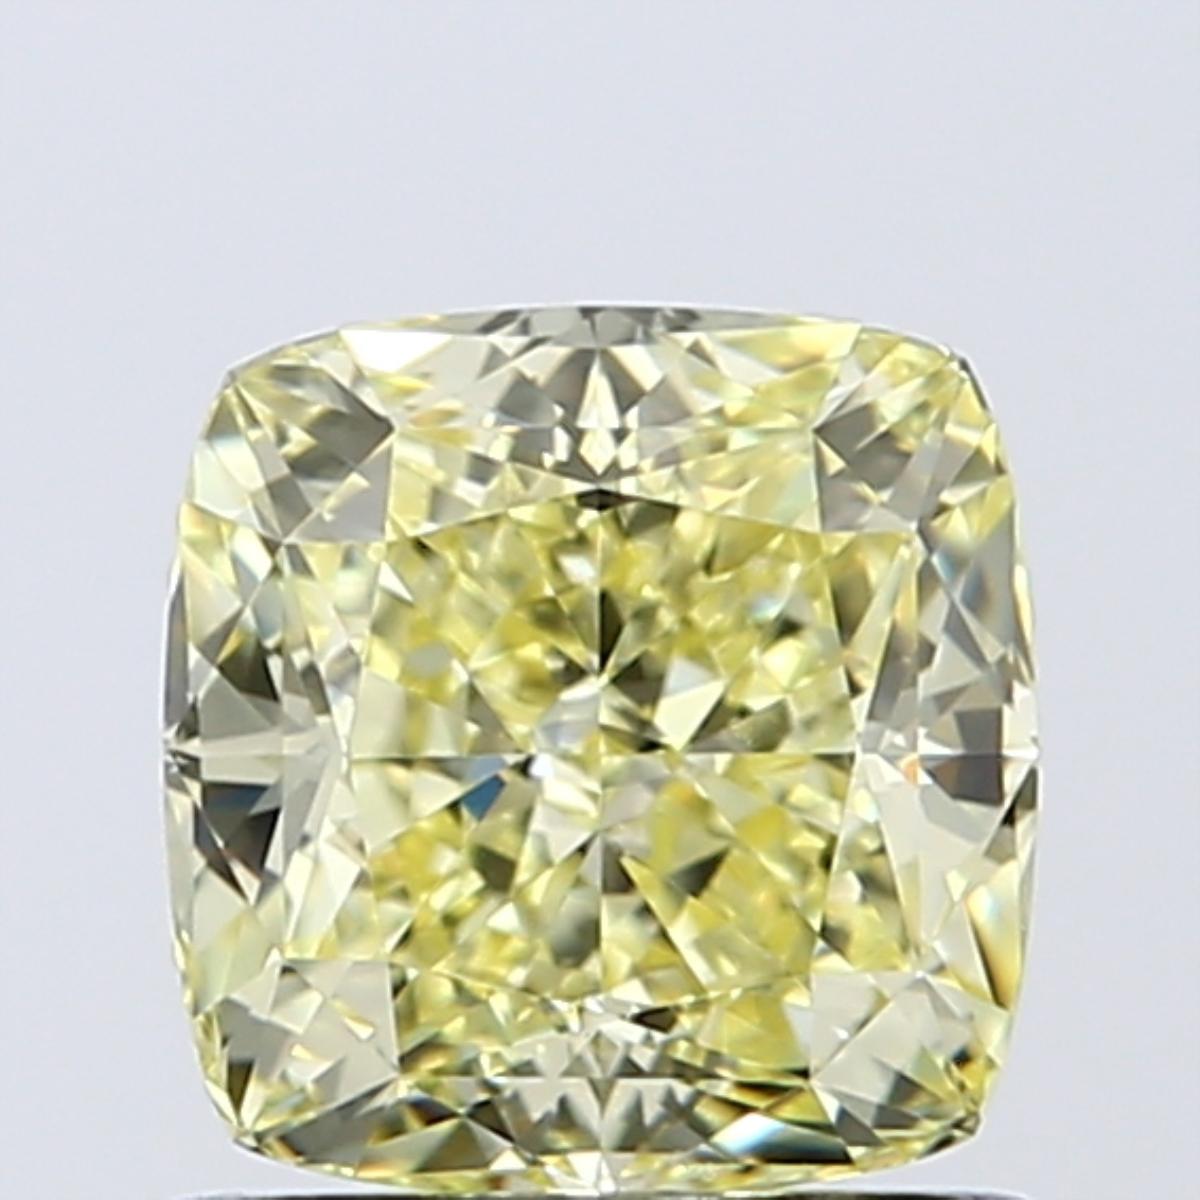 GIA Certified 1.00-1.05 Carat VS2, Fancy Yellow, Cushion Cut, Natural Diamond

Perfect Yellow Color Diamonds for perfect gifts.

5 C's:
Certificate: GIA
Carat: 1.00-1.05ct
Color: Natural Fancy Yellow
Clarity: VS2(Very Very Slightly Included)
Cut: